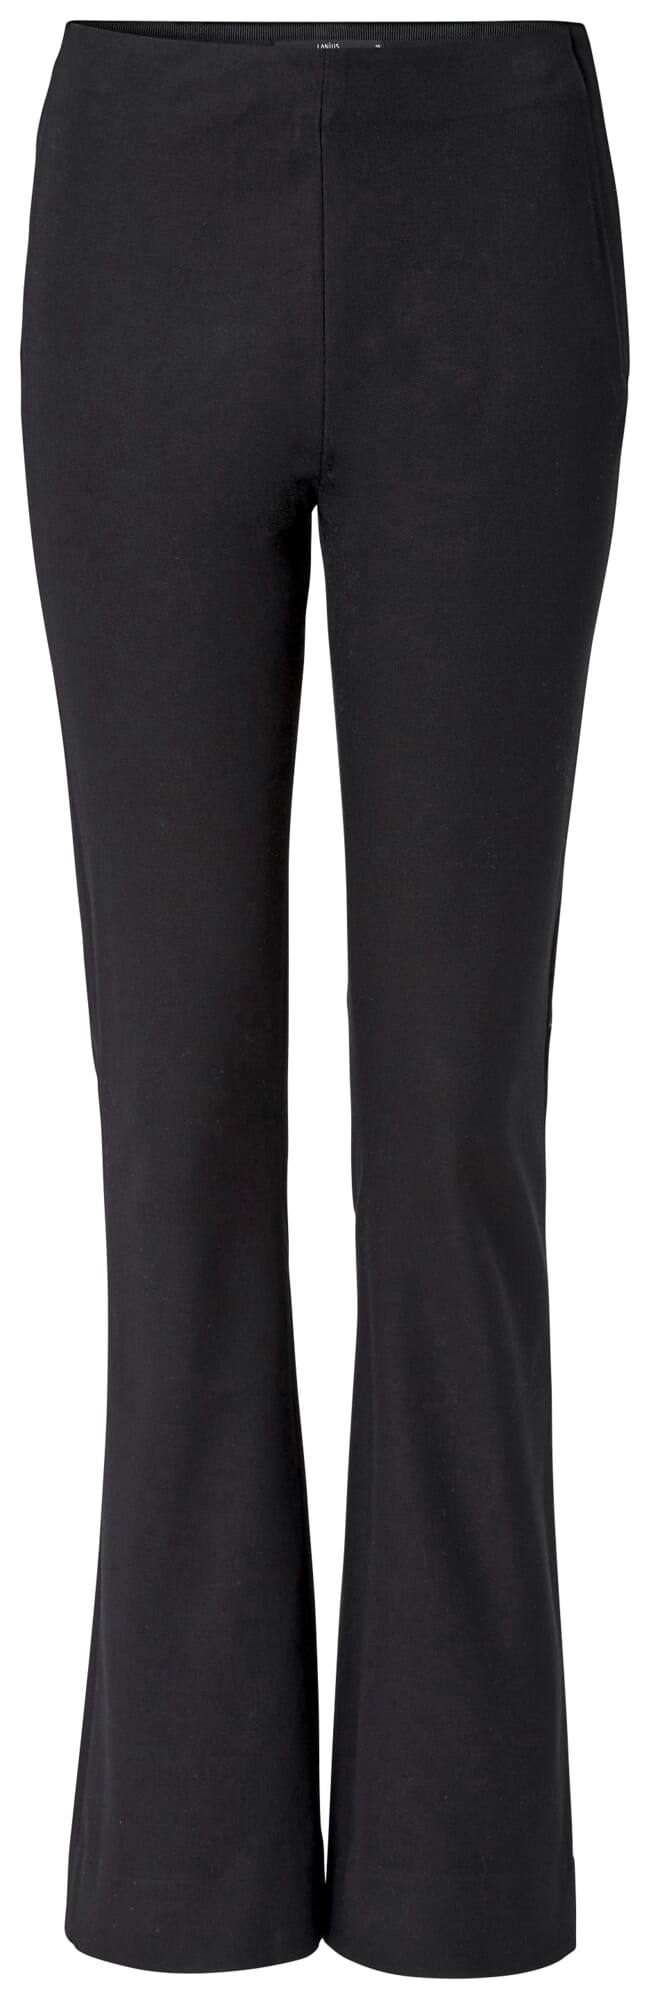 LADIES PLUS SIZE PLAIN PALAZZO BAGGY PANTS WOMENS WIDE LEG FLARED TROUSERS  8-26 - Helia Beer Co